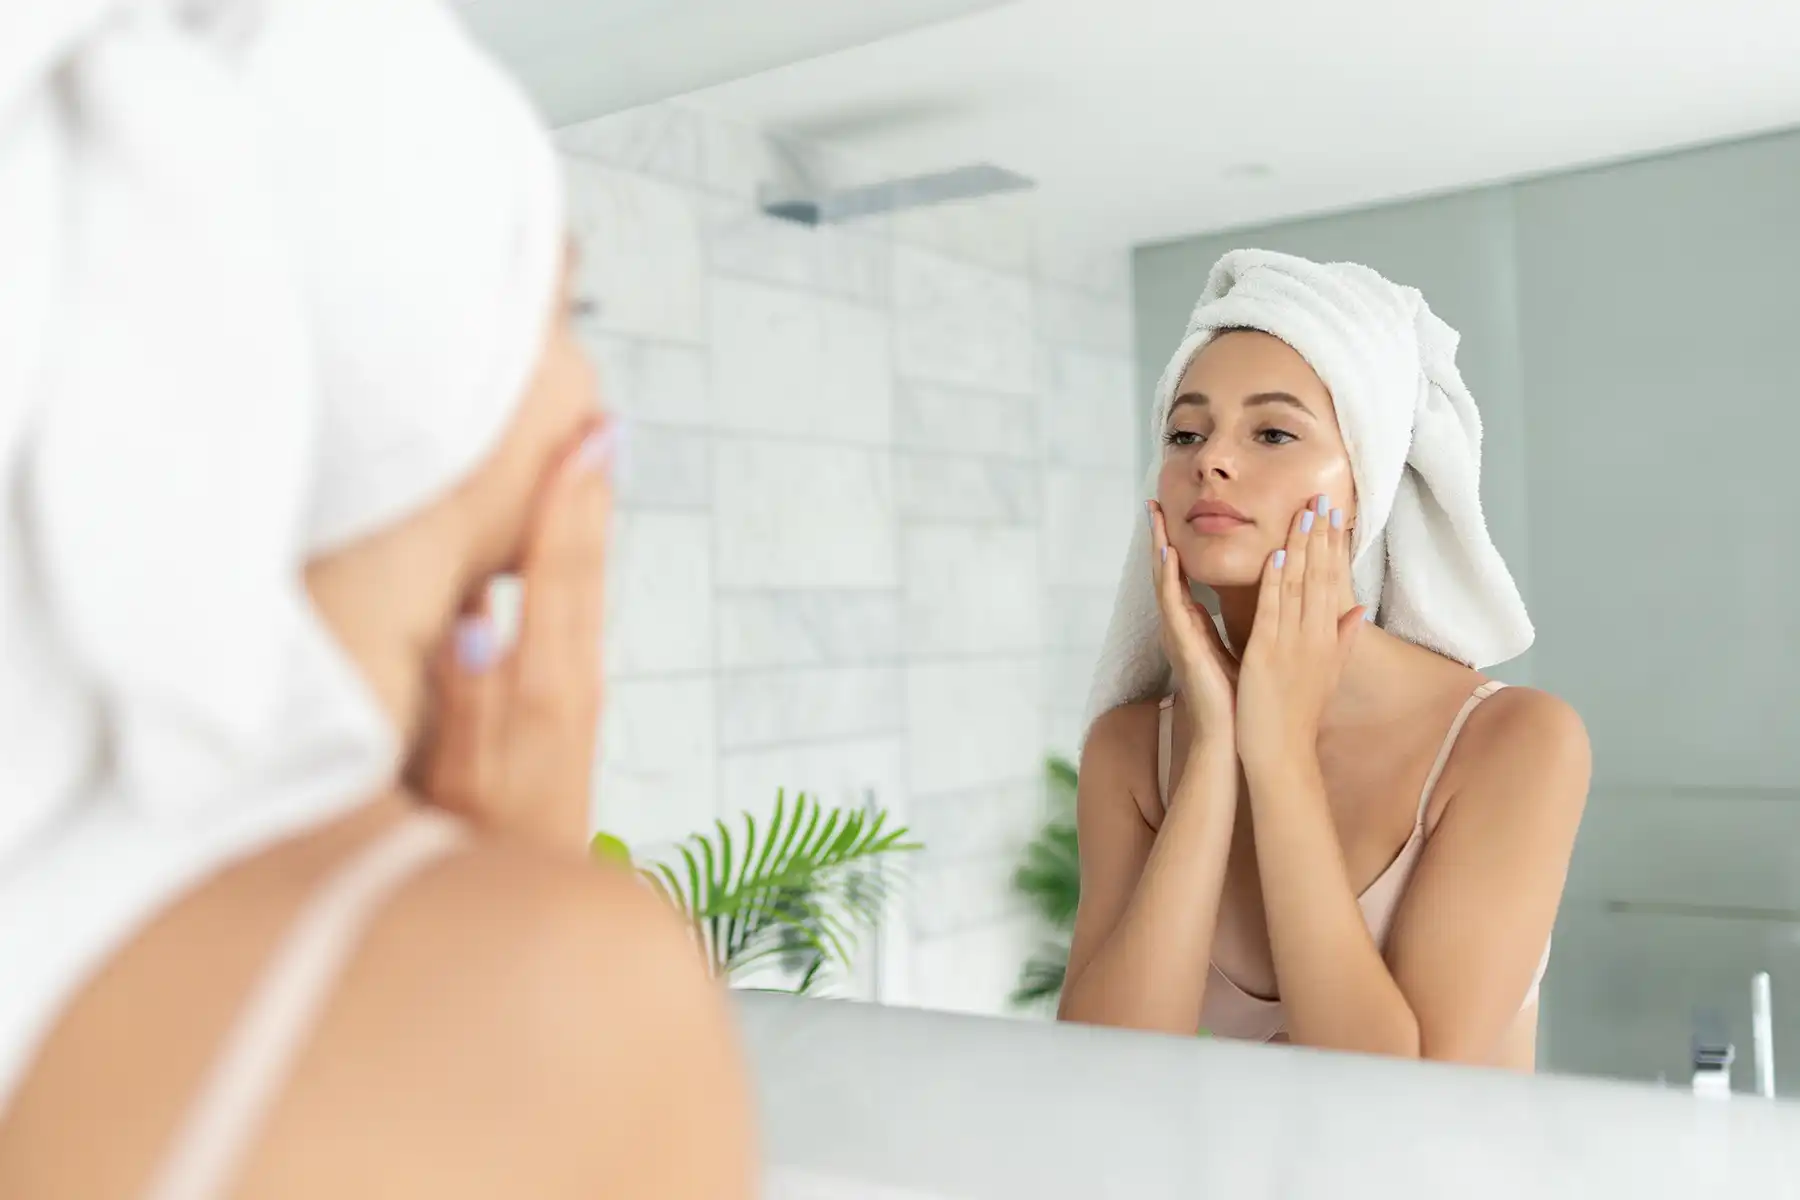 Woman wearing a towel on her head applying moisturizer to her face and looking into the mirror.